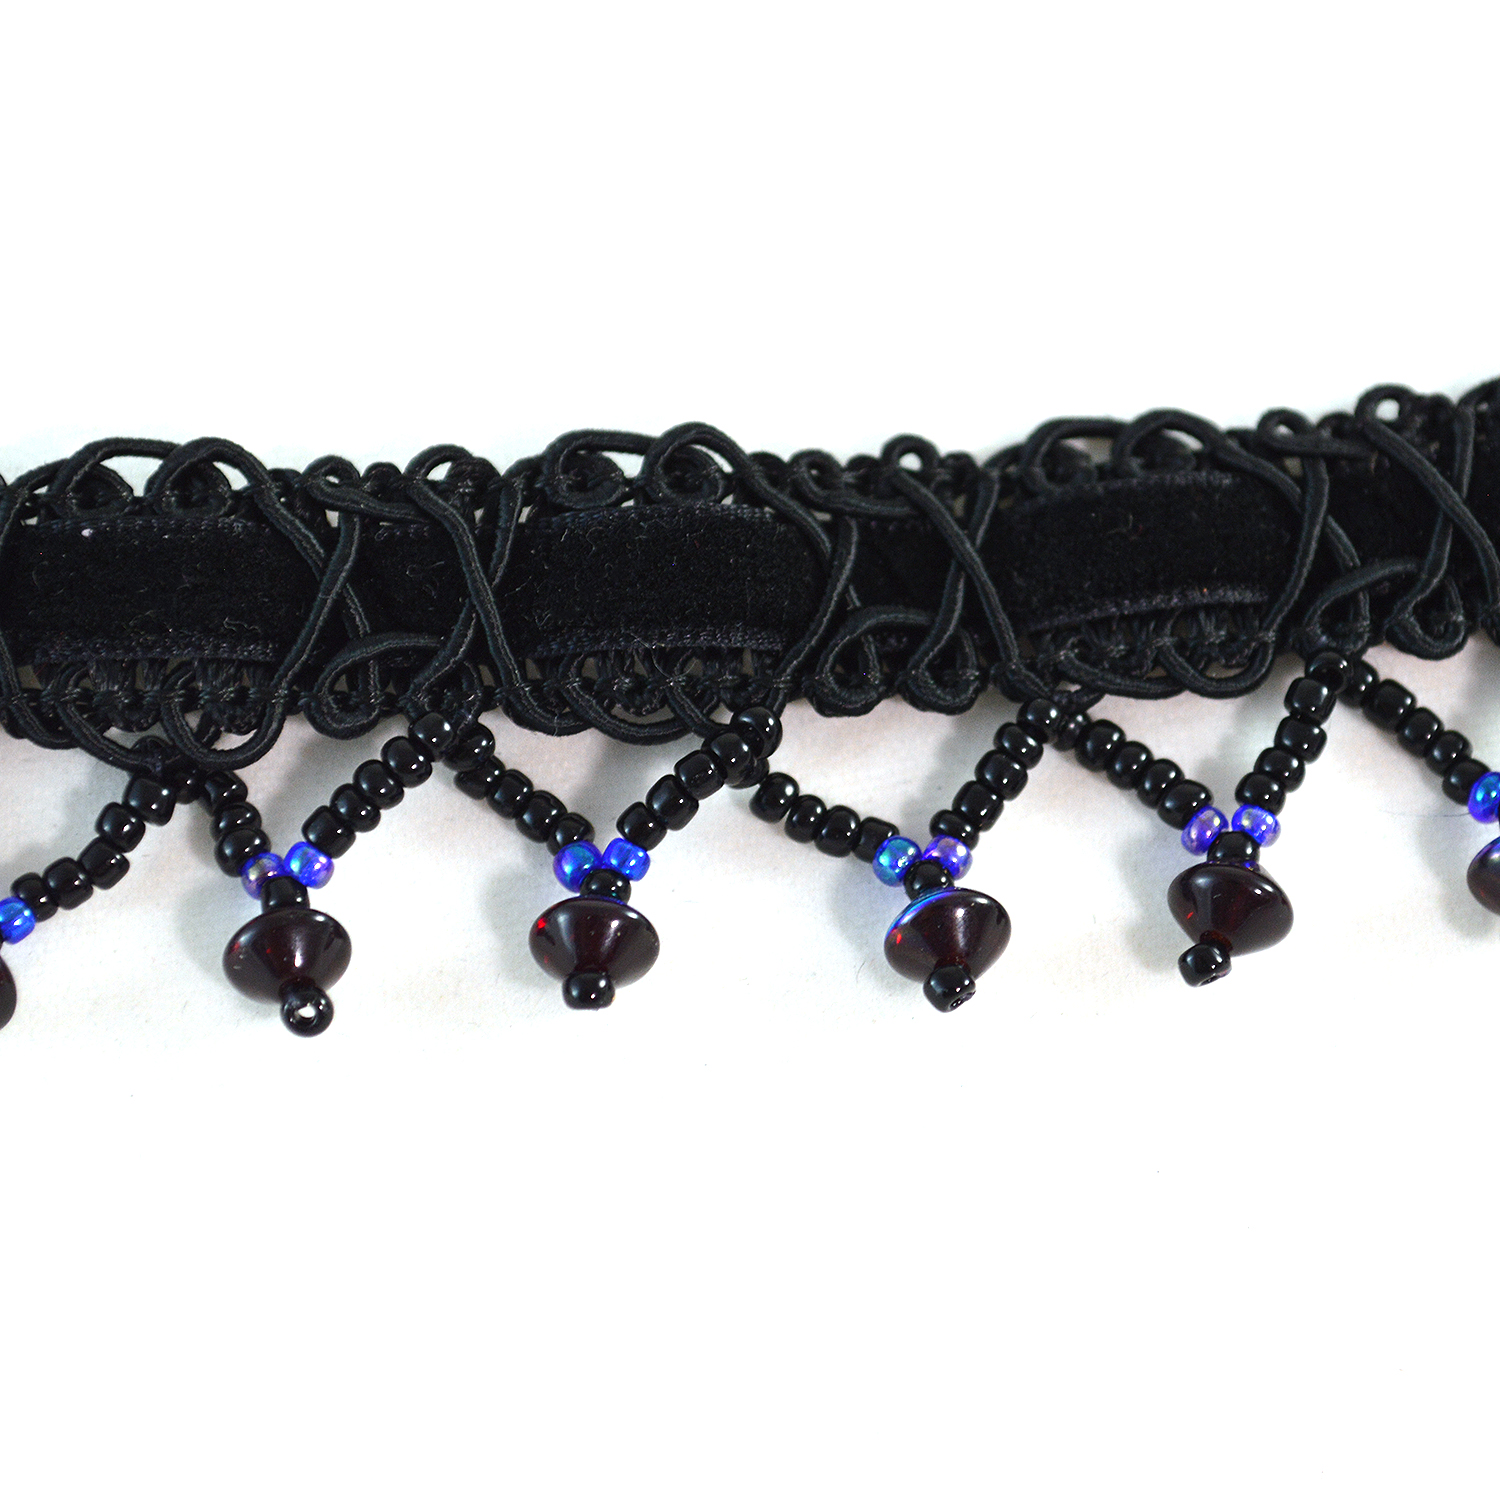 Gothic Lace Choker in Black and Blue - Twisted Pixies